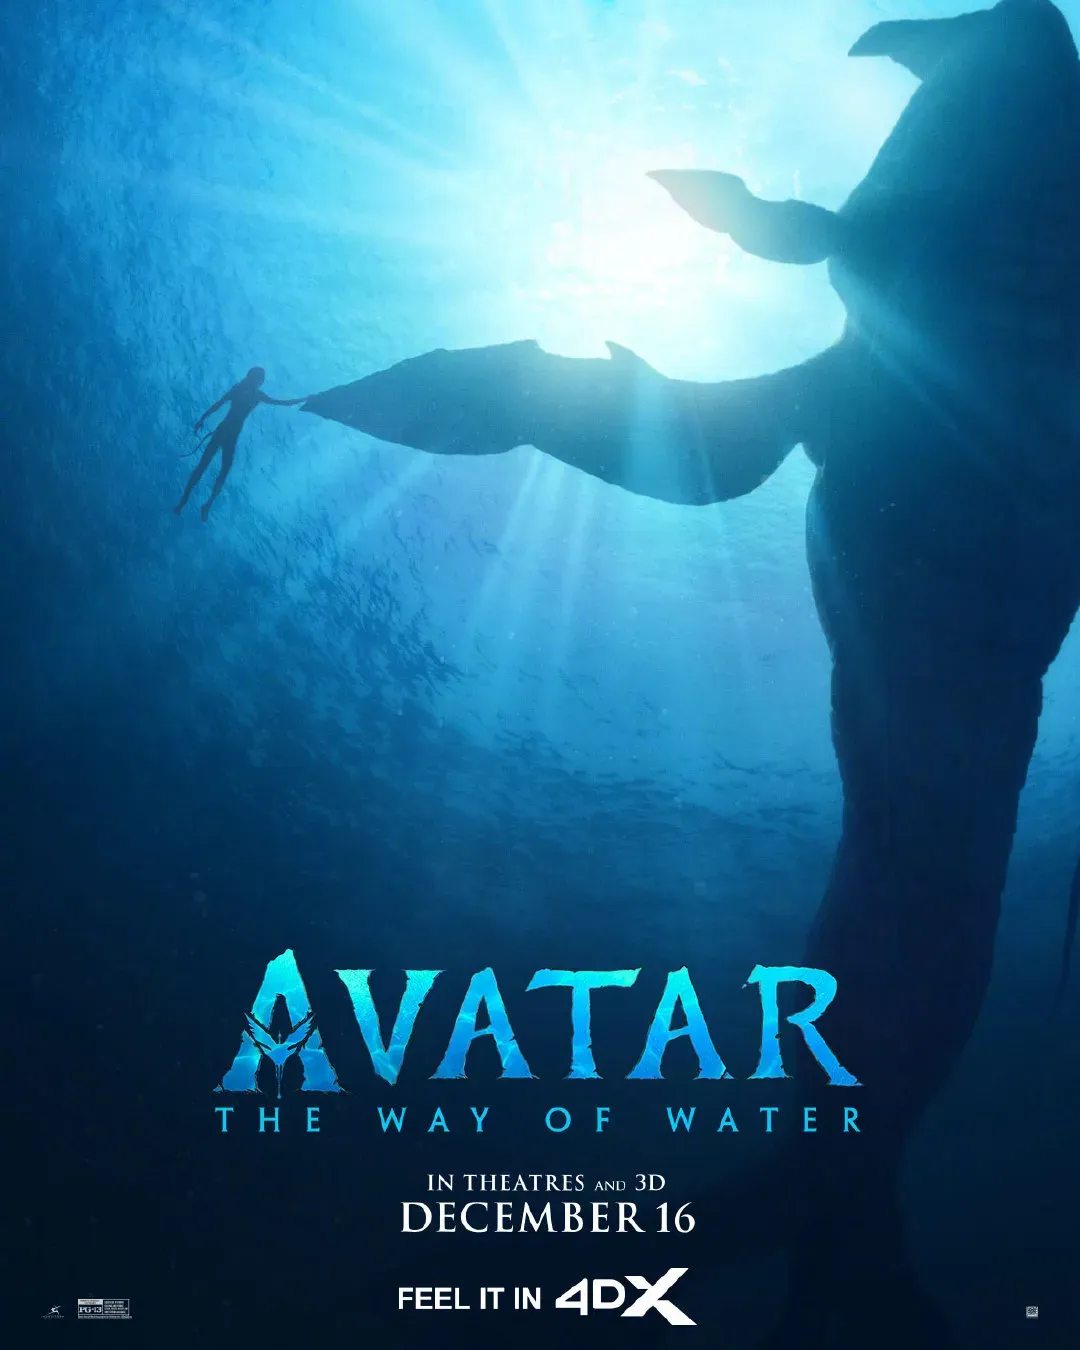 'Avatar: The Way of Water' releases several new format posters: real 3D, 4DX, ScreenX | FMV6